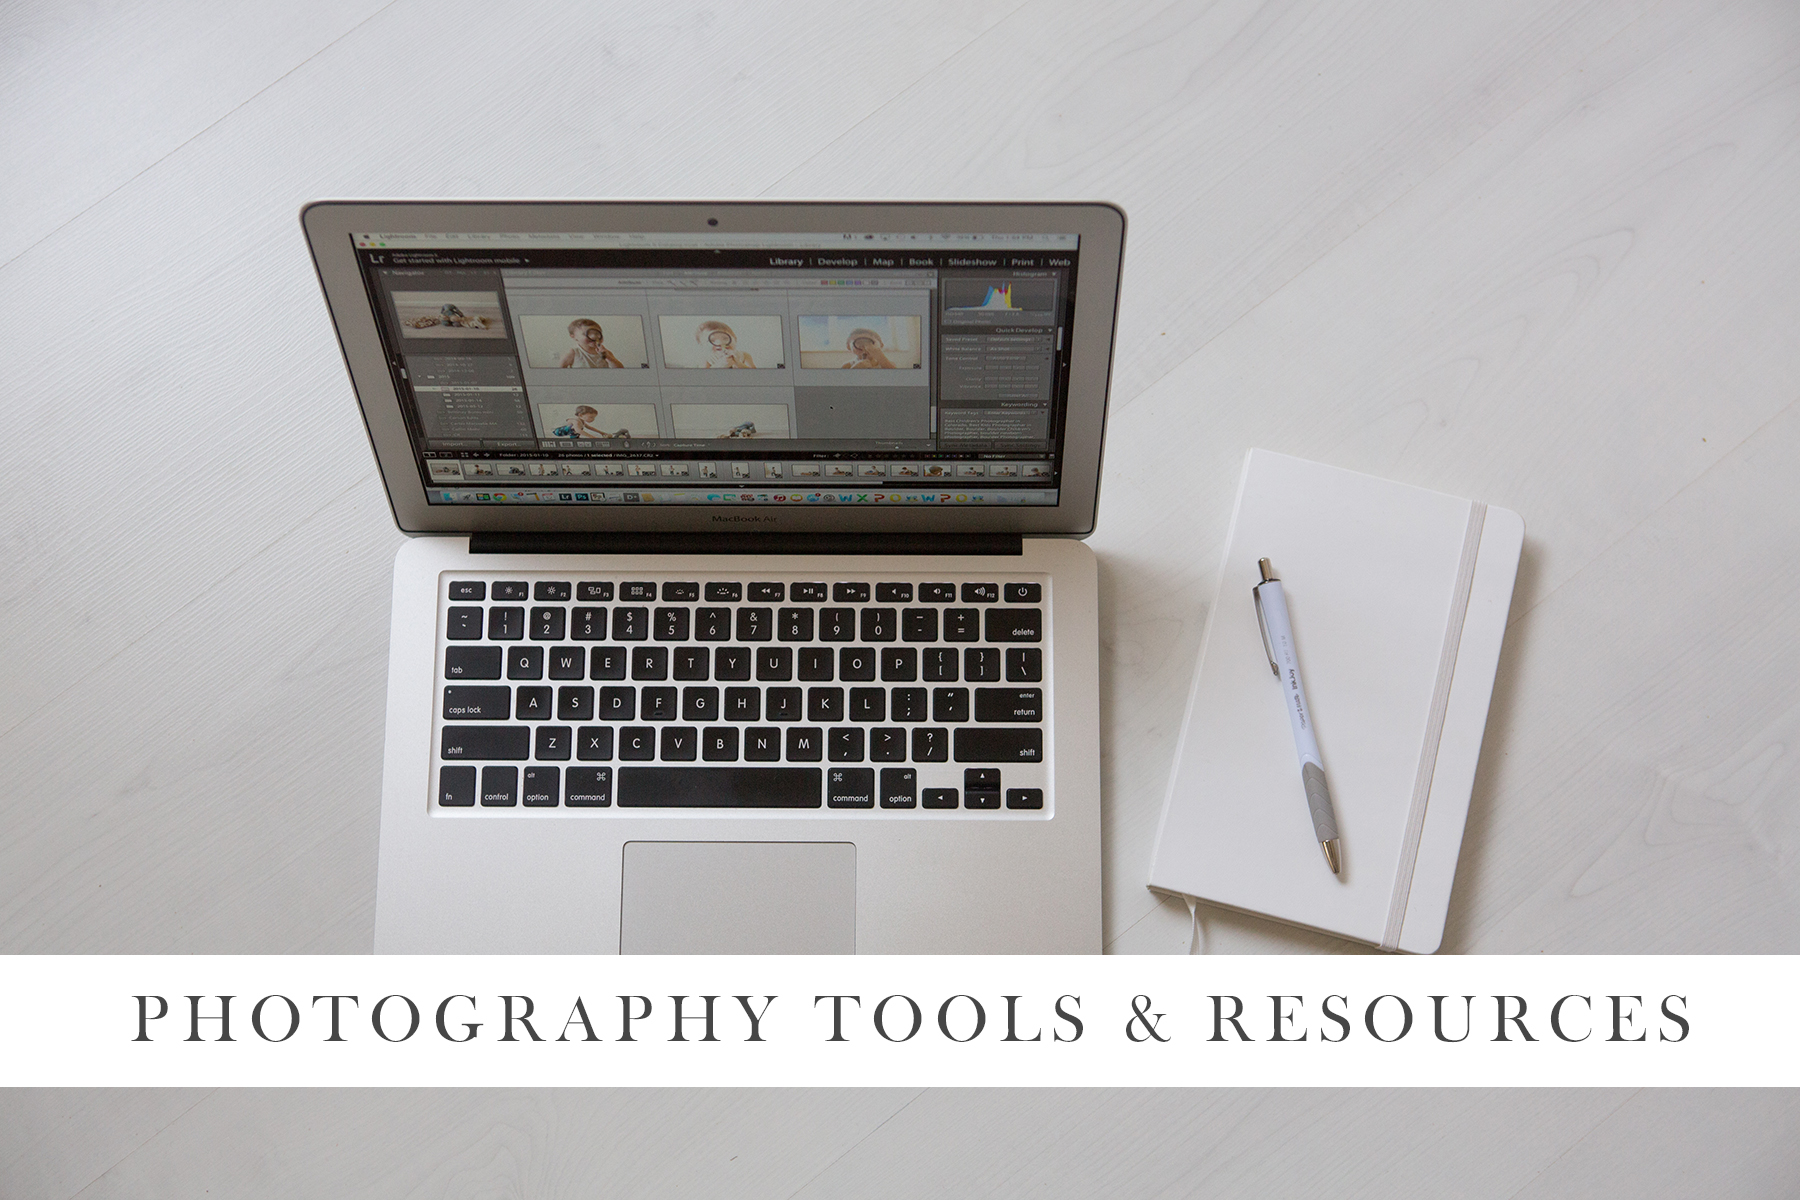 Free photography tools, resources, tips from Denver newborn photographer and Boulder family photographer, Jenni Maroney.